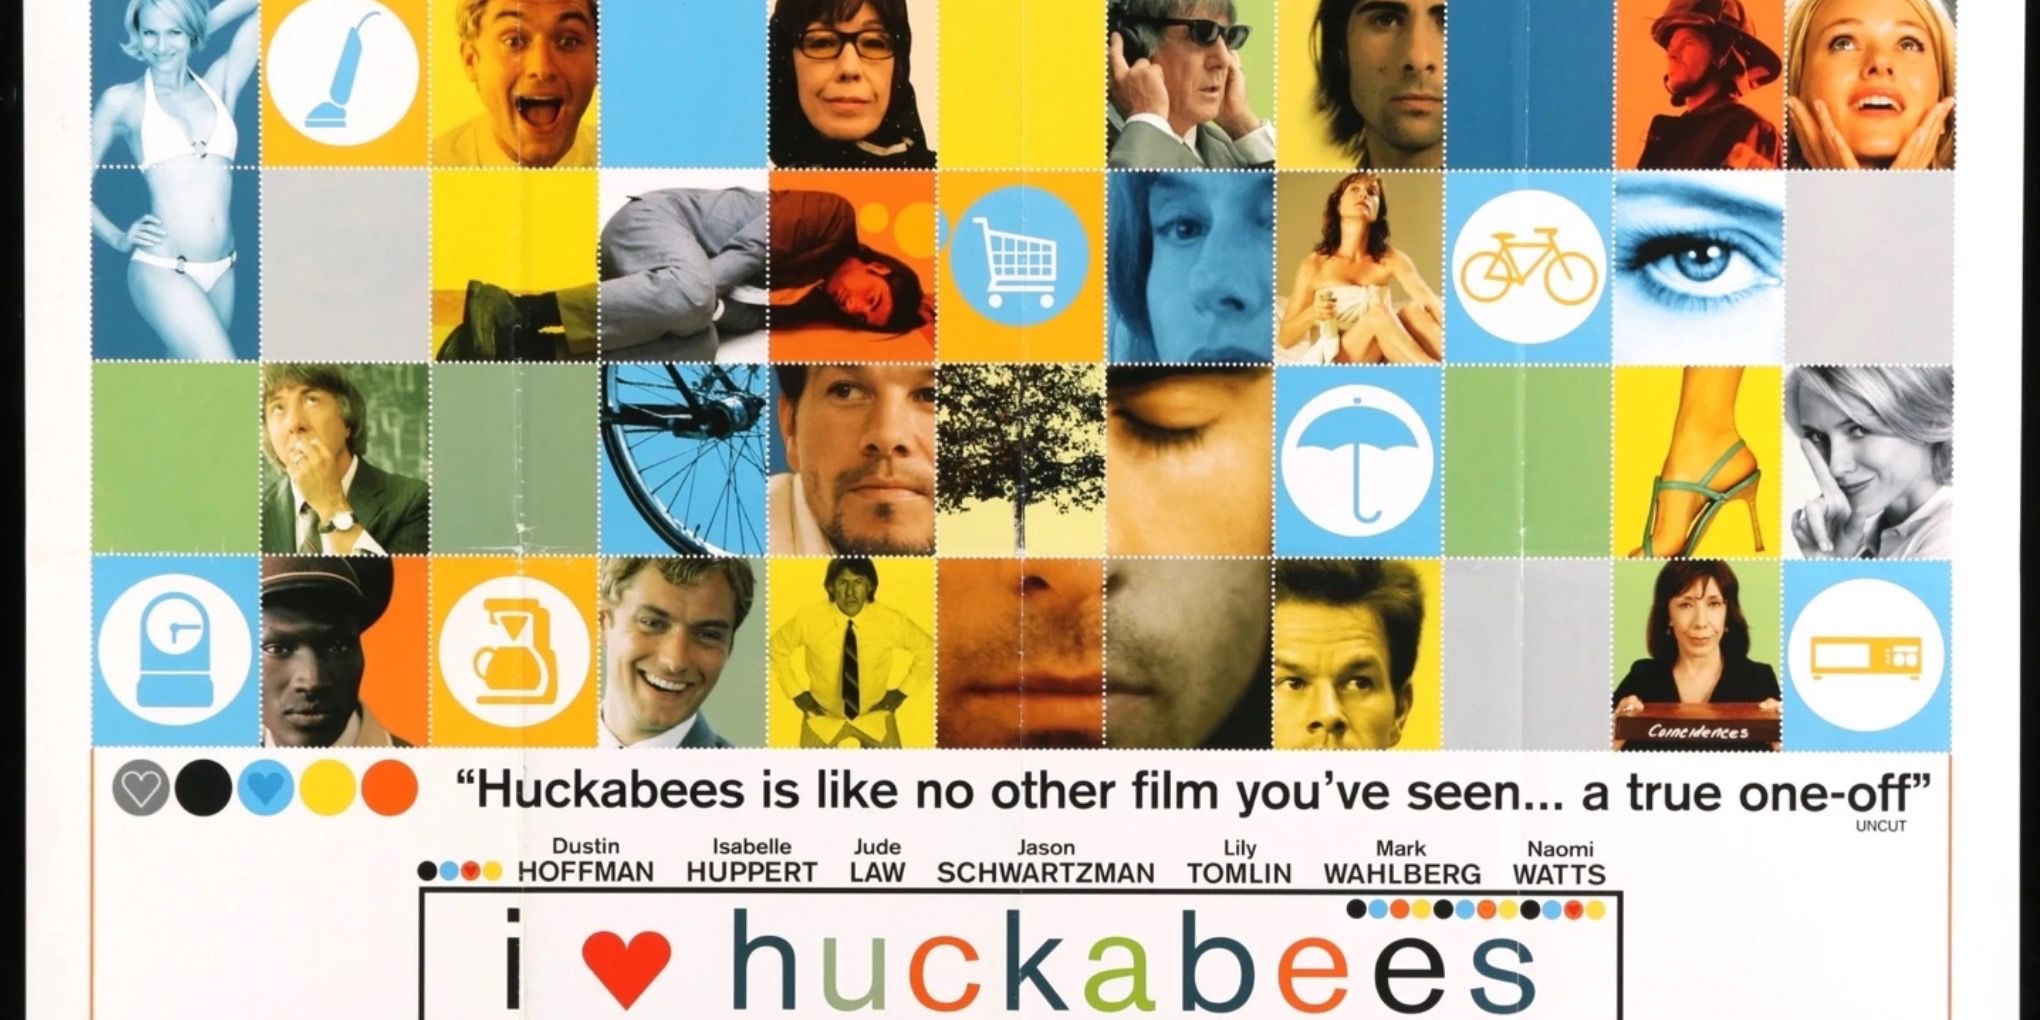 A poster for I Heart Huckabees (2004)